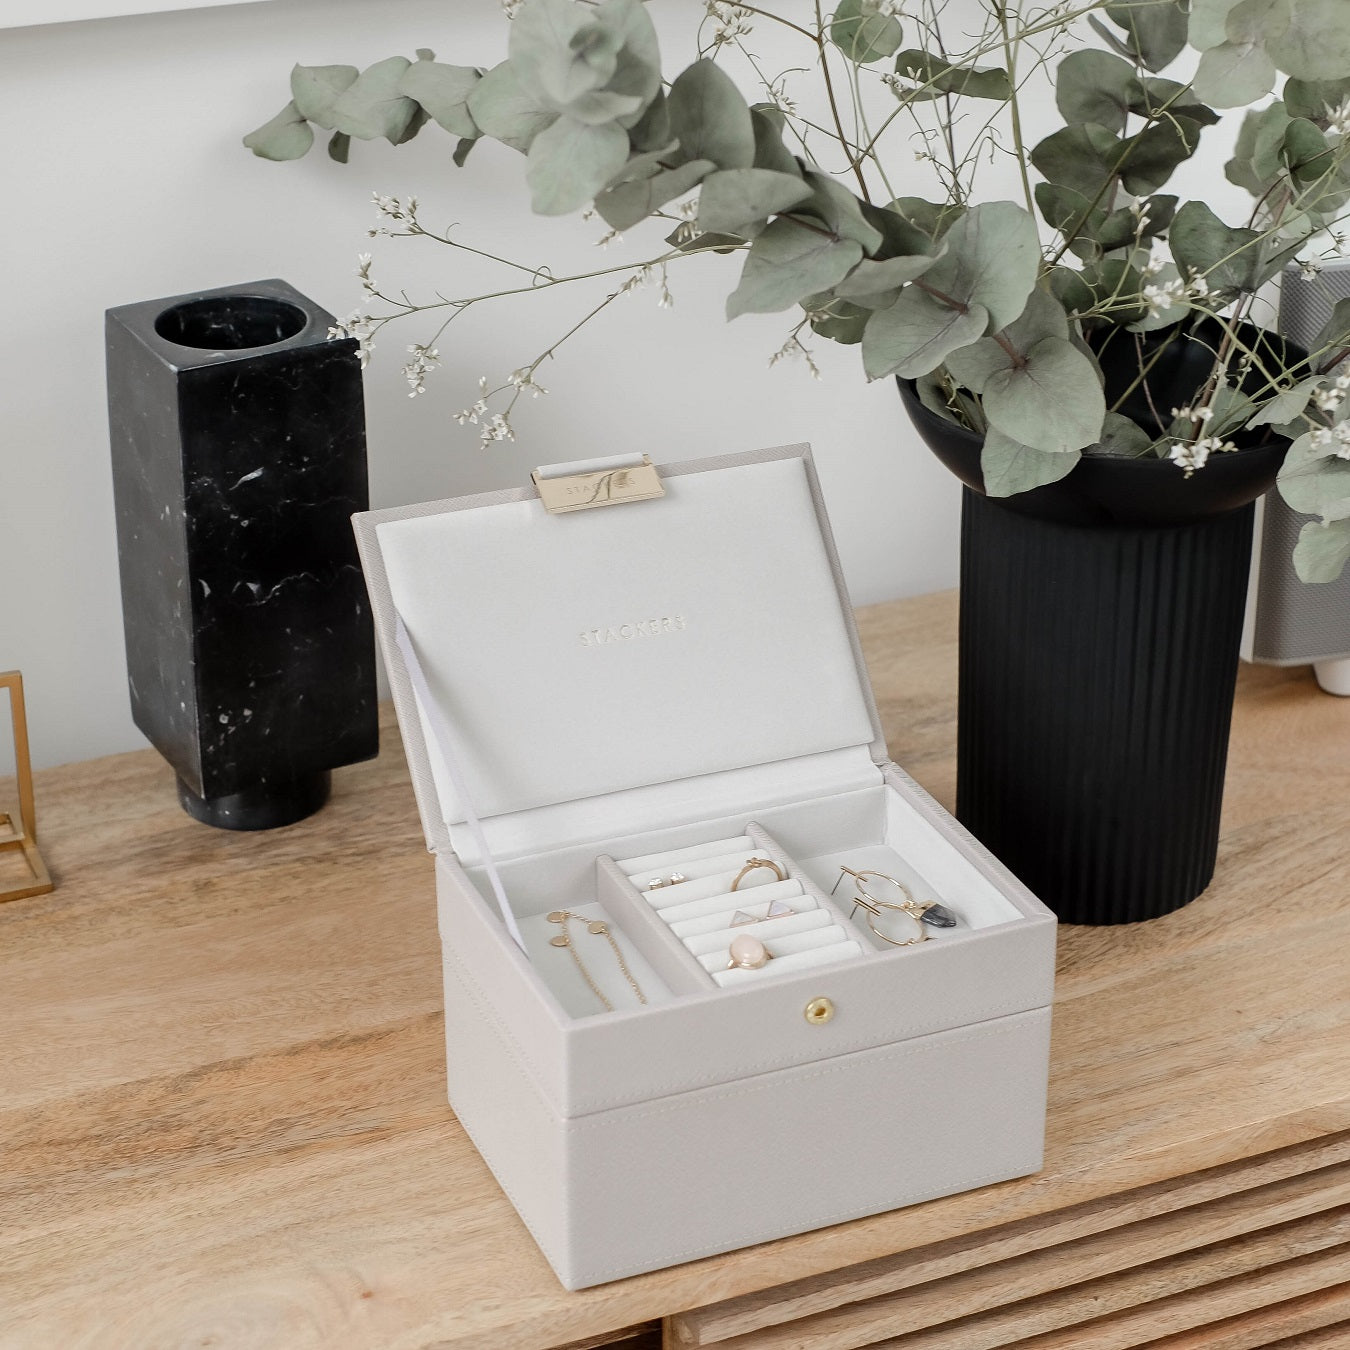 JEWELLERY BOXES – STACKERS LONDON